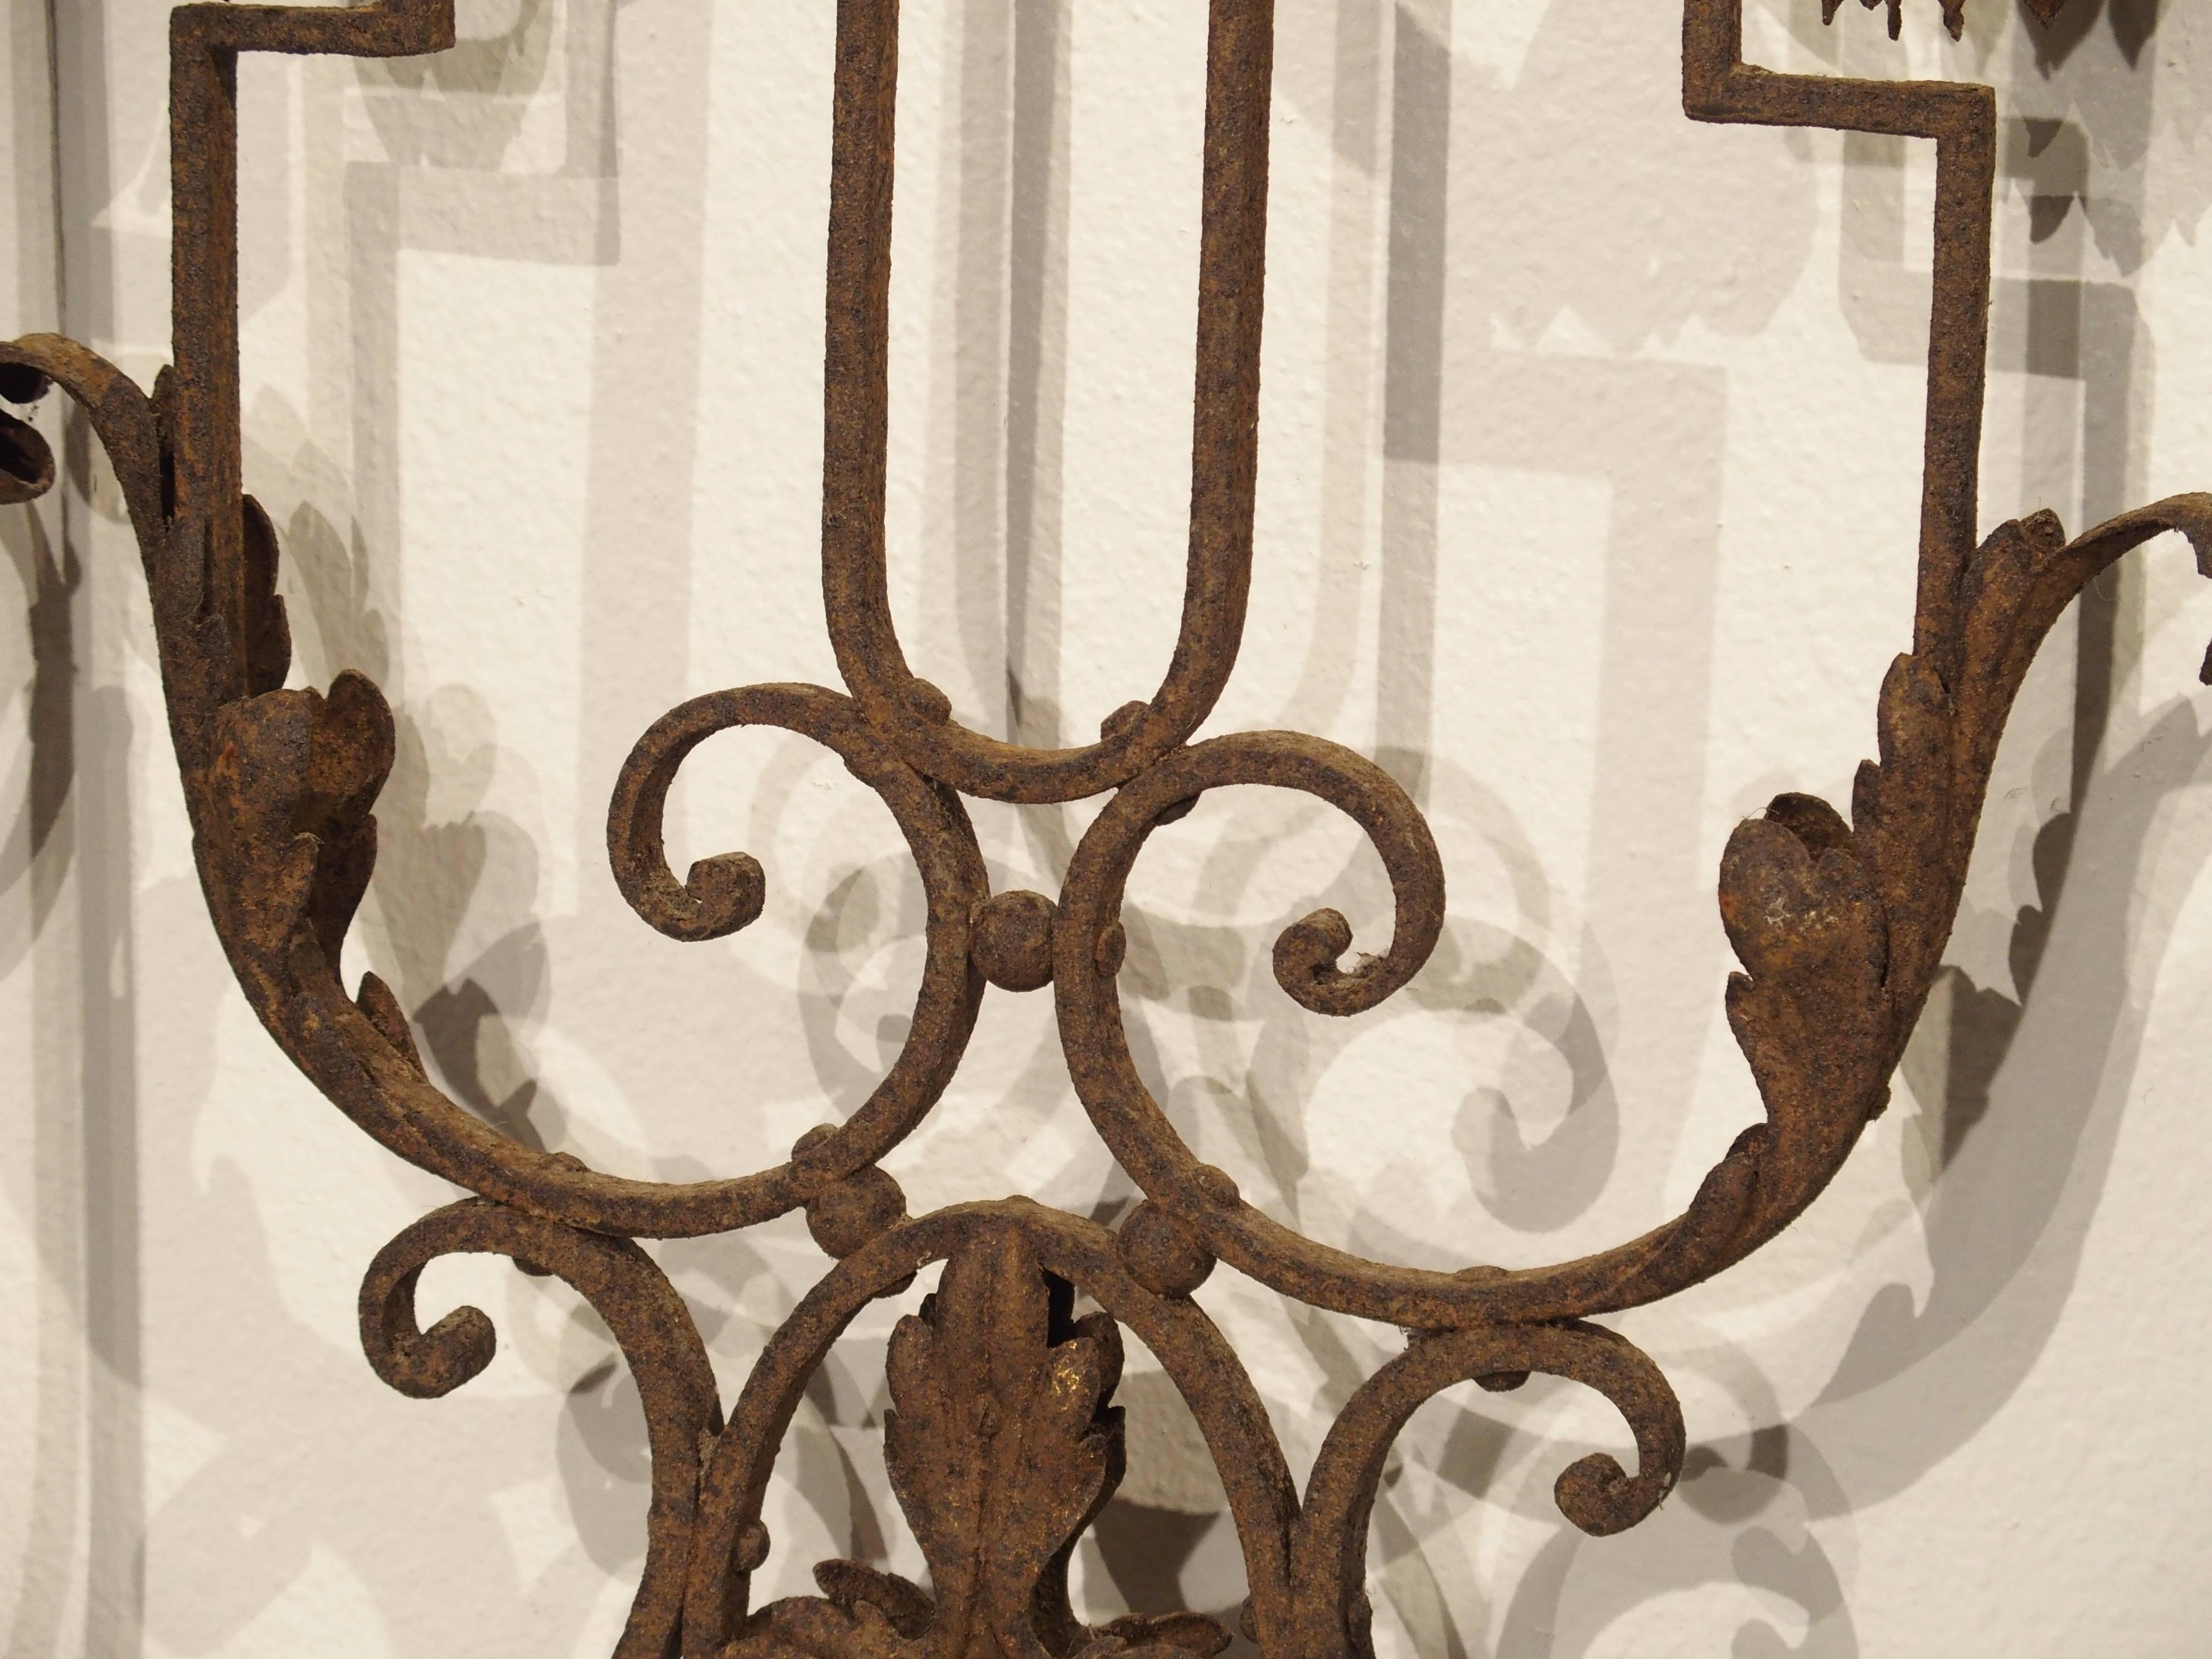 French Pair of Antique Wrought Iron Garden Gates from France, circa 1890